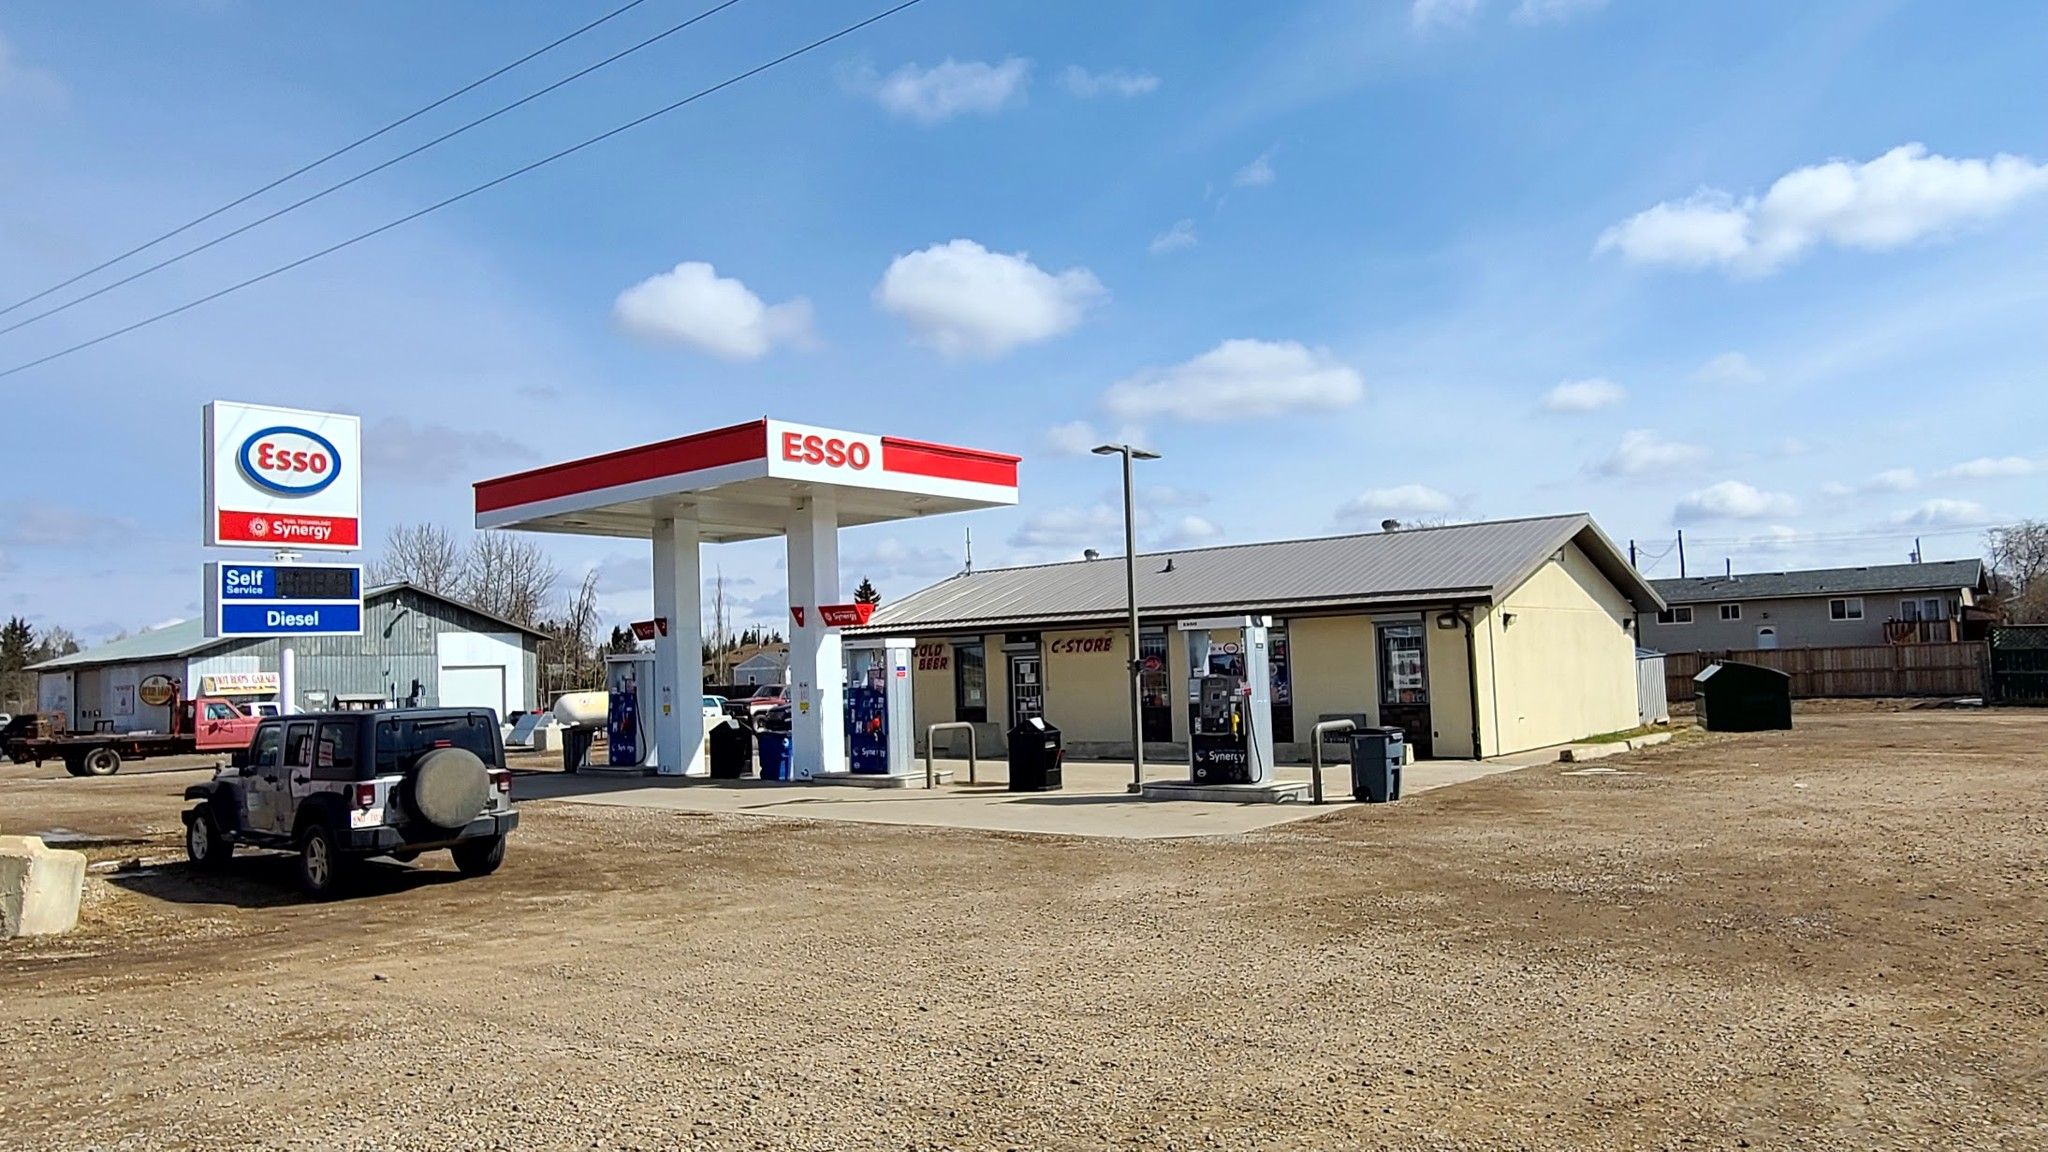 Main Photo: ESSO gas station for sale Alberta: Business with Property for sale : MLS®# 1018367